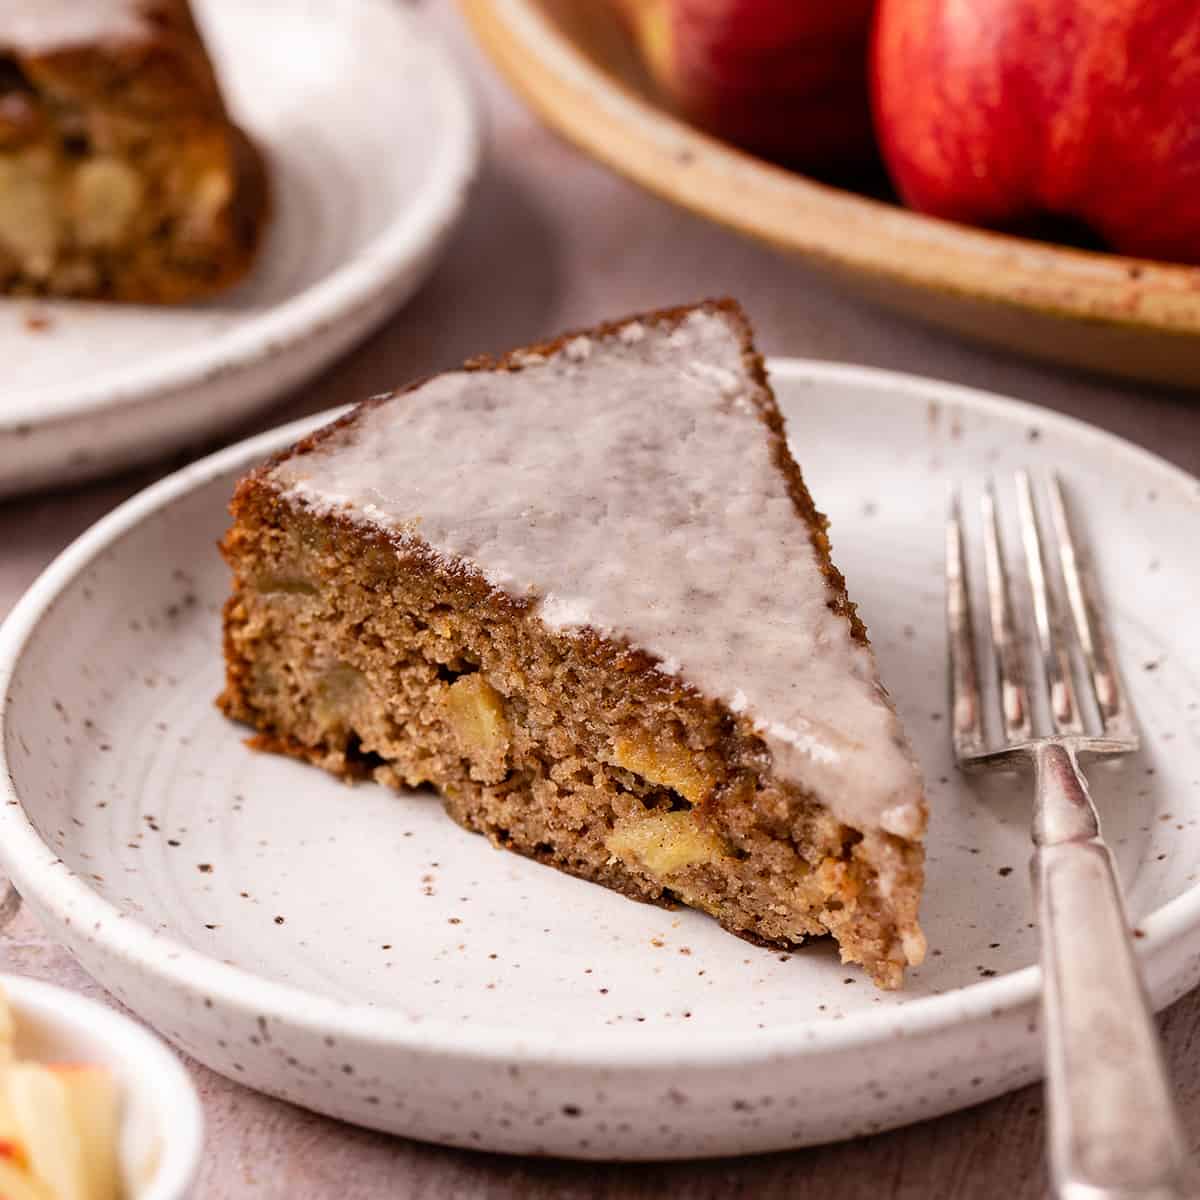 a slice of Apple Cake on a plate